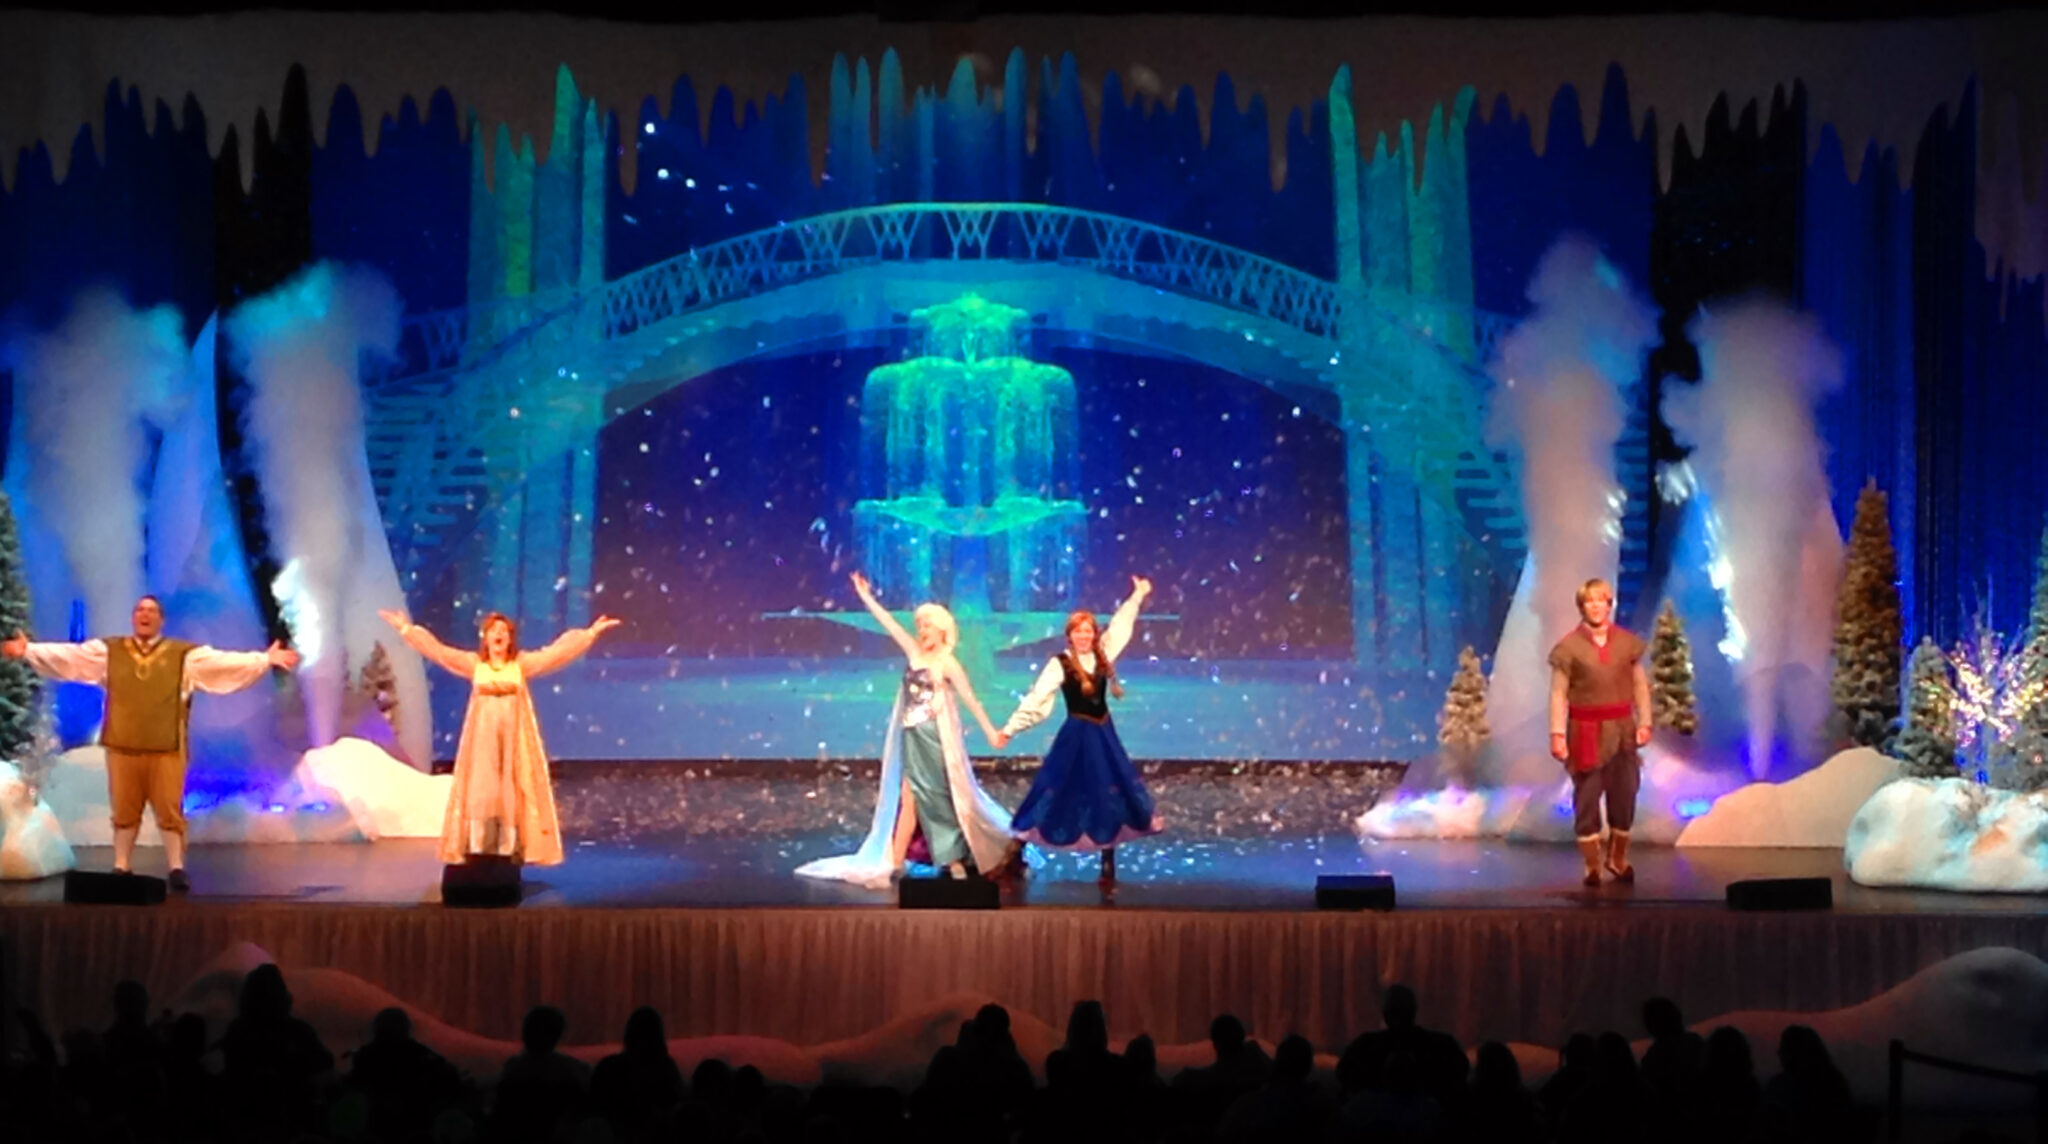 For the First Time in Forever: A Frozen Sing-Along Celebration - Show do Hollywood Studios